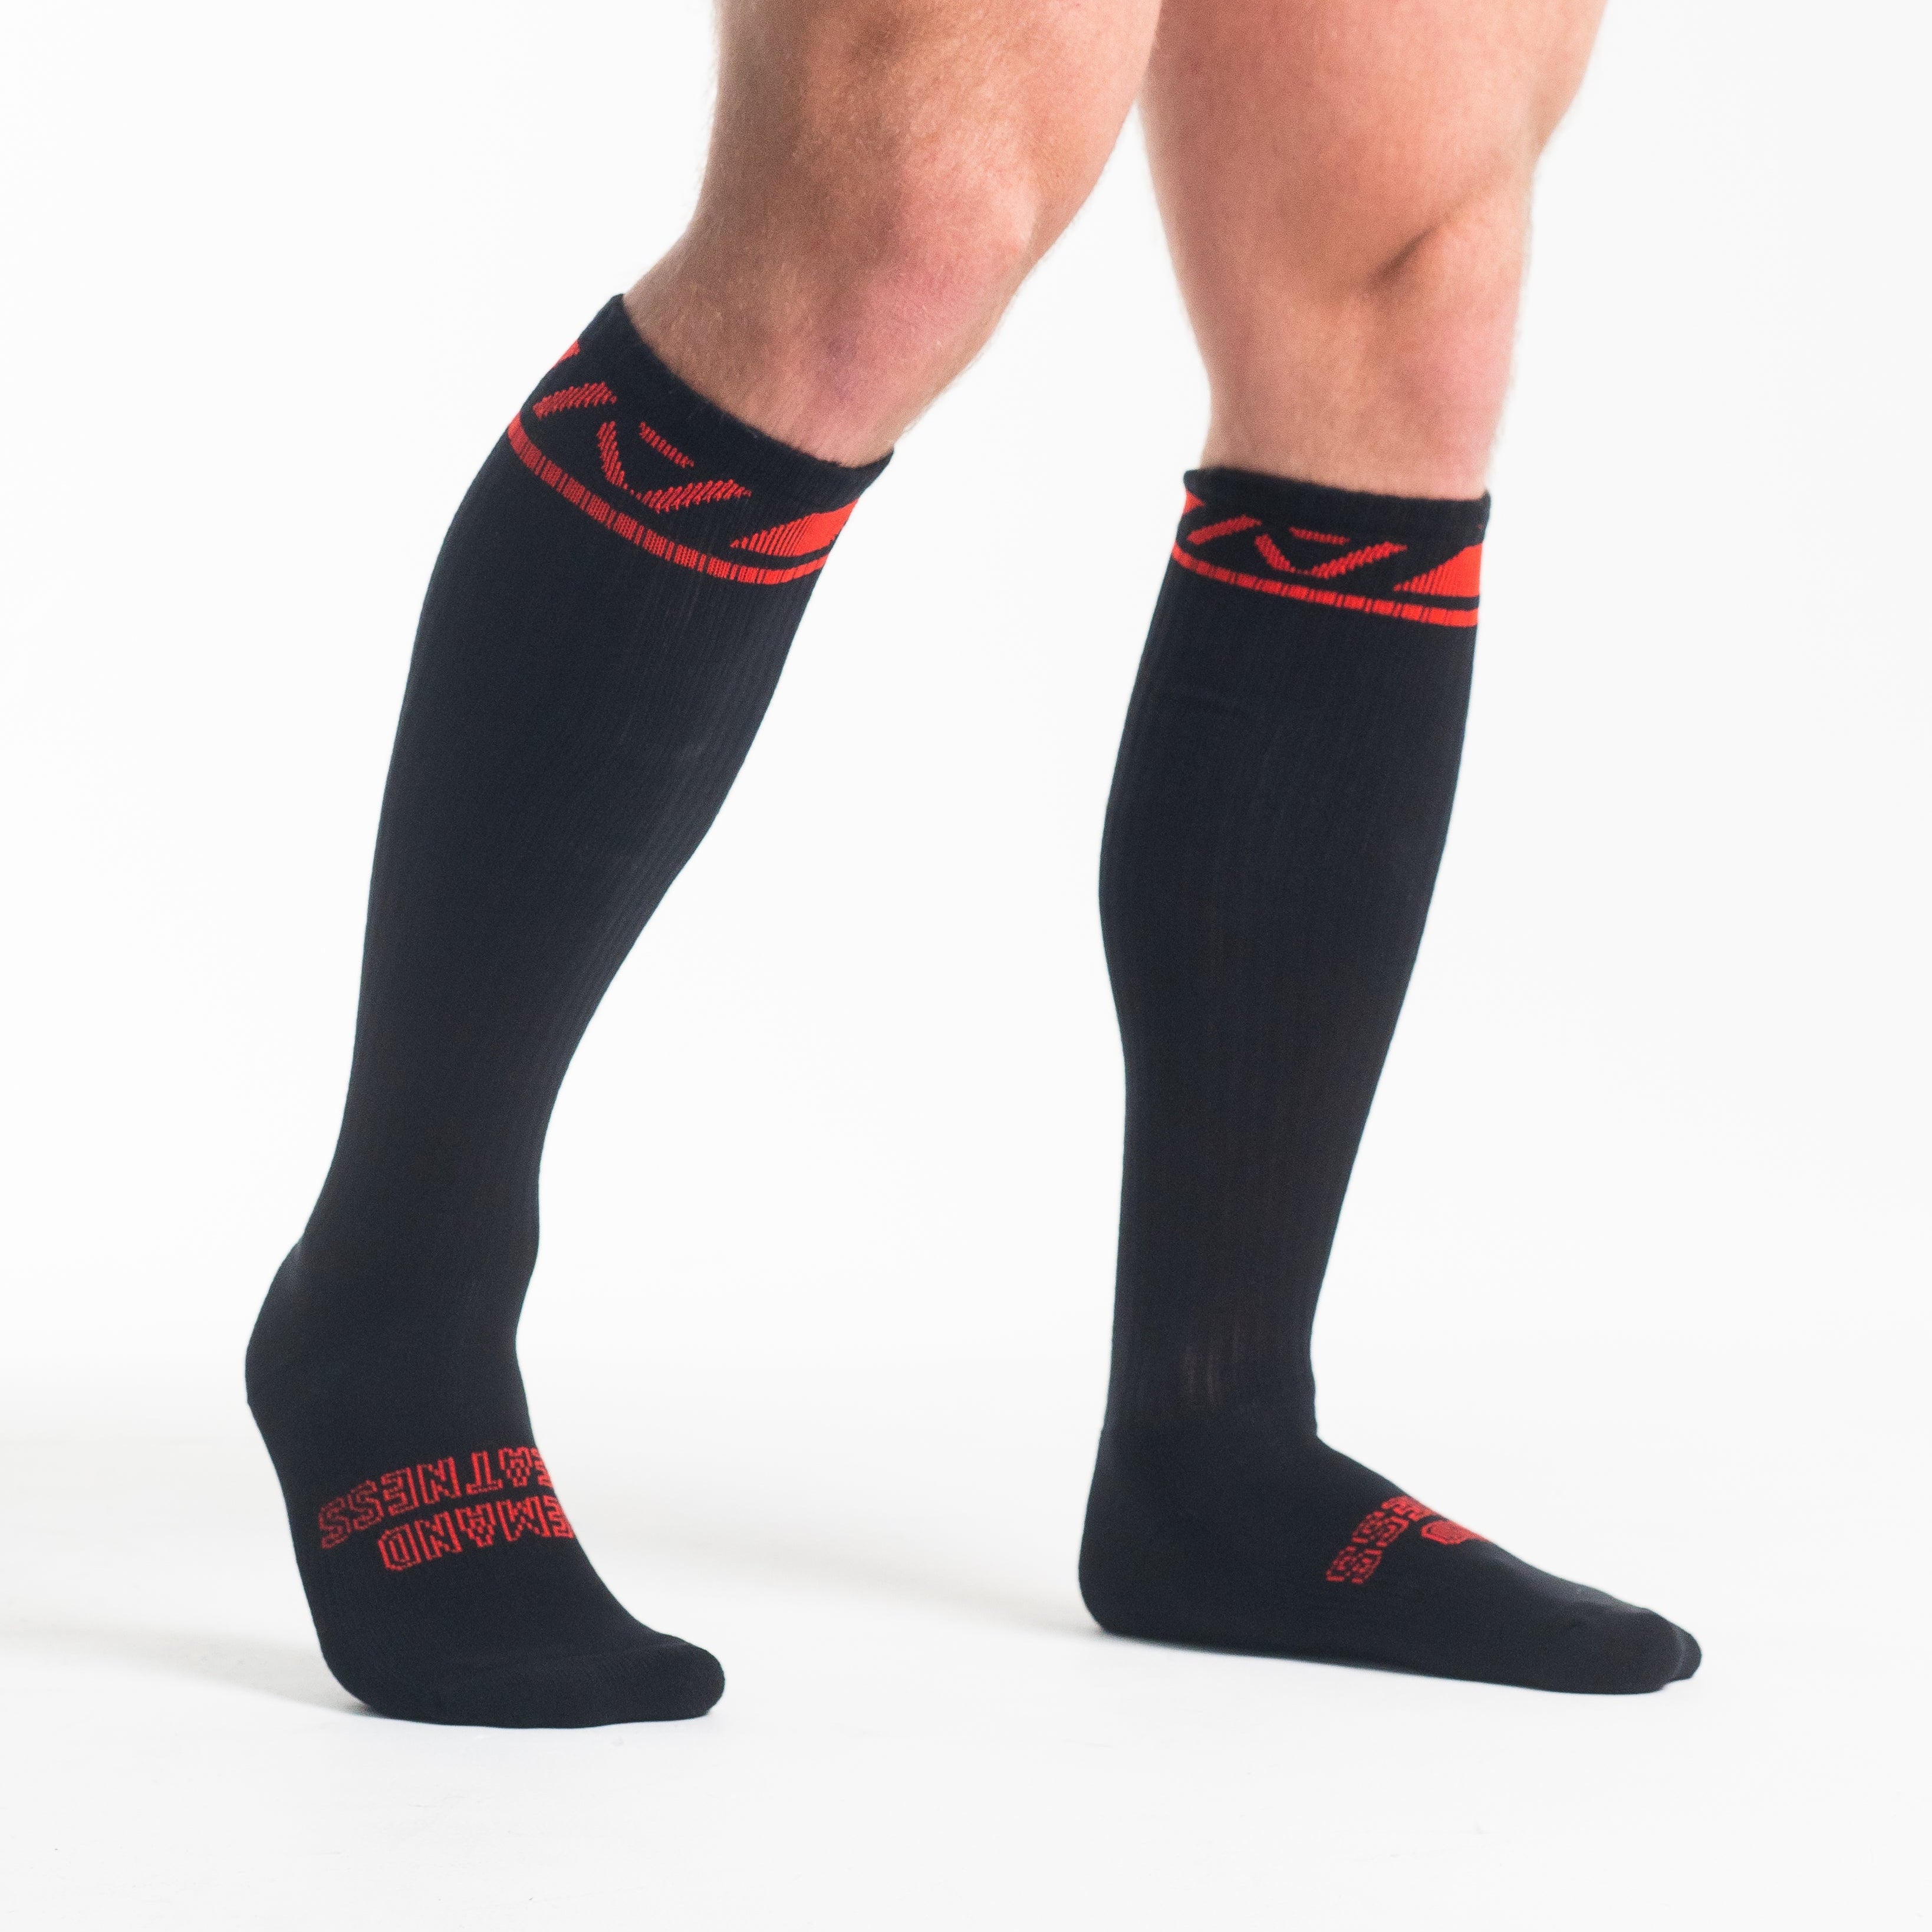 A7 Red Dawn Deadlift socks are designed specifically for pulls and keep your shins protected from scrapes. A7 deadlift socks are a perfect pair to wear in training or powerlifting competition. The IPF Approved Kit includes Powerlifting Singlet, A7 Meet Shirt, A7 Zebra Wrist Wraps, A7 Deadlift Socks, Hourglass Knee Sleeves (Stiff Knee Sleeves and Rigor Mortis Knee Sleeves). Genouillères powerlifting shipping to France, Spain, Ireland, Germany, Italy, Sweden and EU.